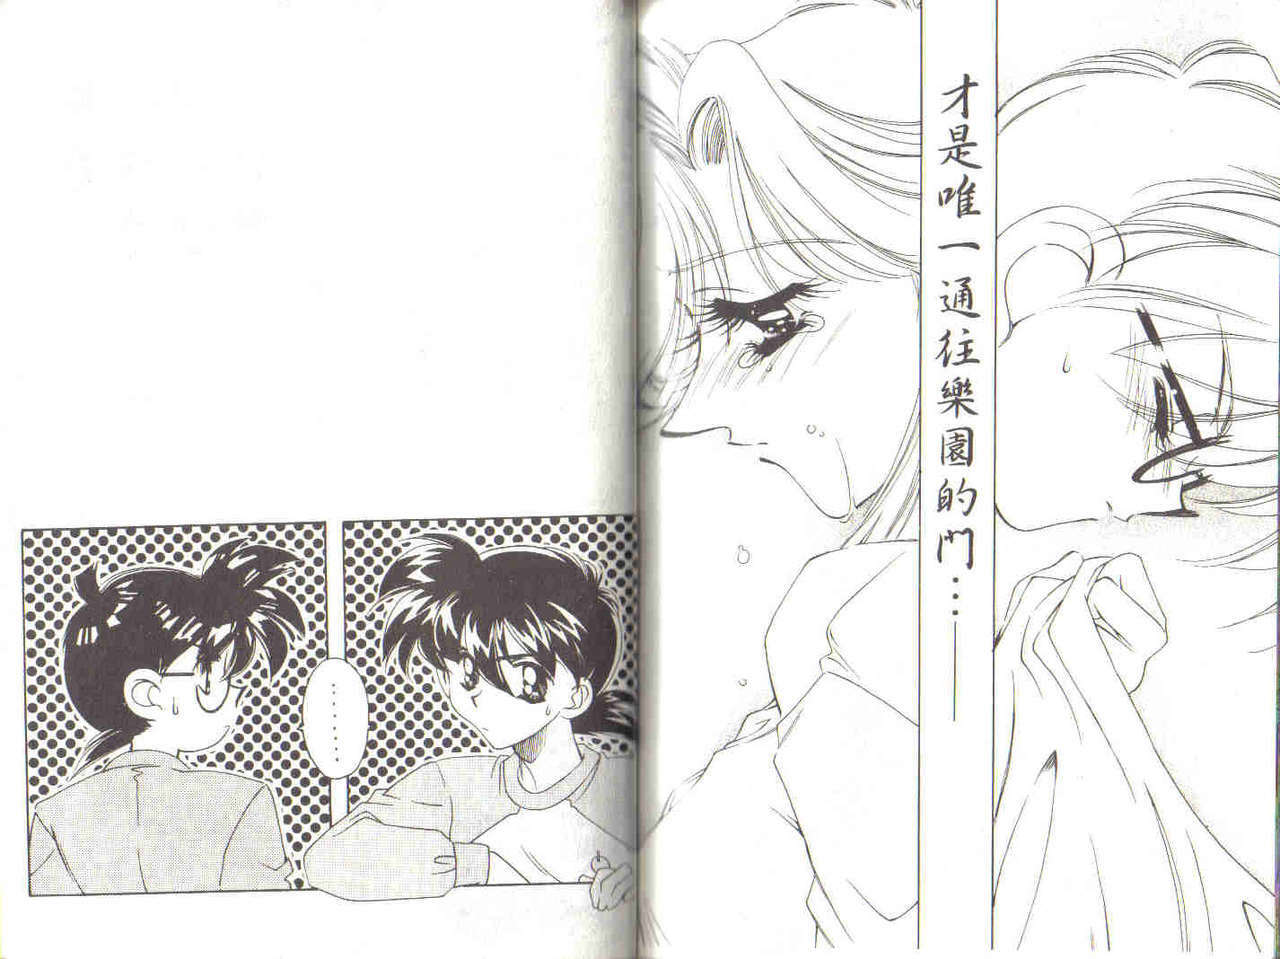 [Ooya Nako] Detective Assistant Vol. 3 (Detective Conan) [Chinese] page 81 full